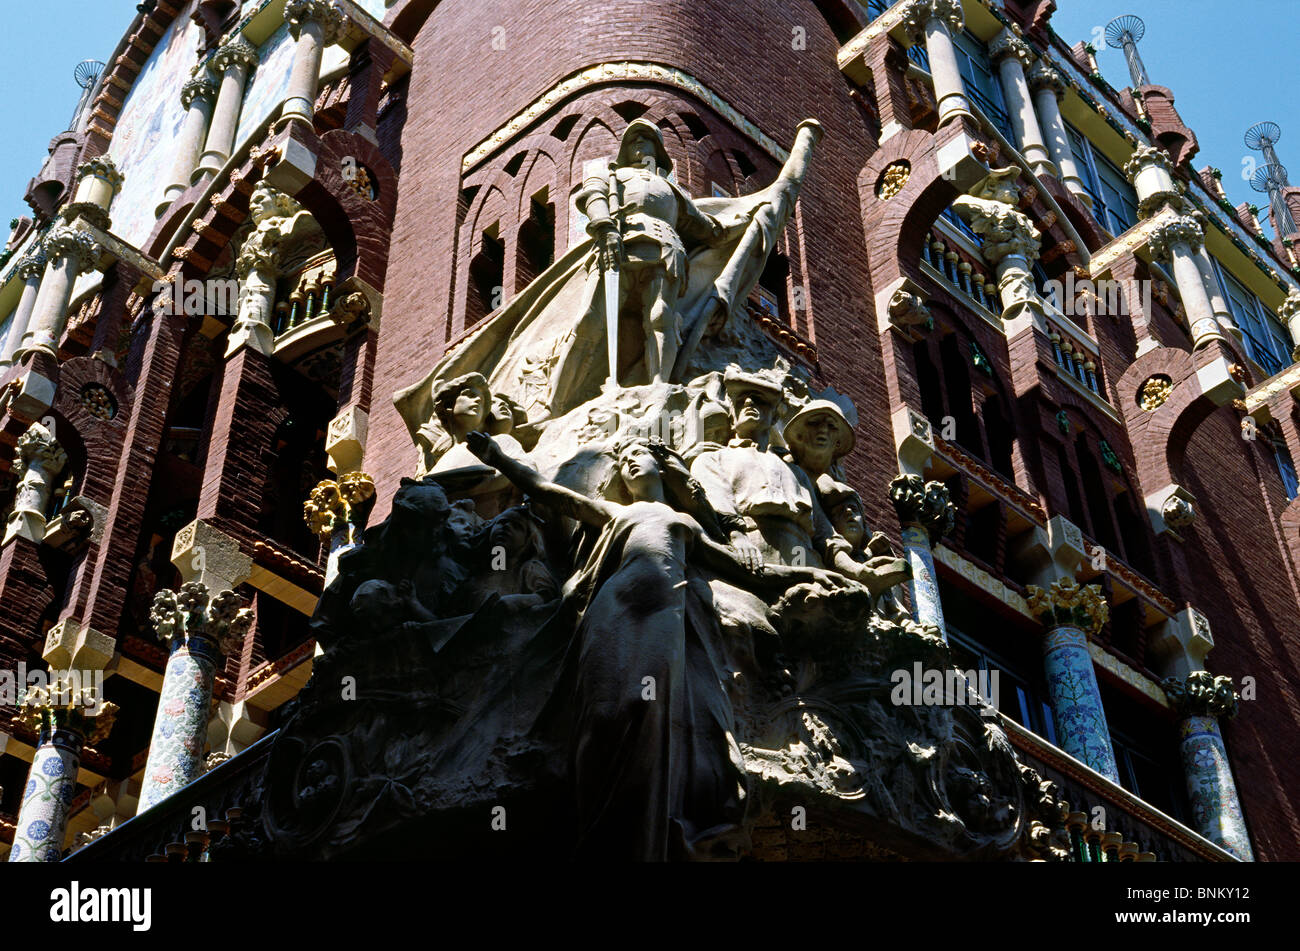 Michael Blay's 'The Catalan Song' sculpture group at the Palau de la Música Catalana (Palace of Catalan Music) in Barcelona. Stock Photo